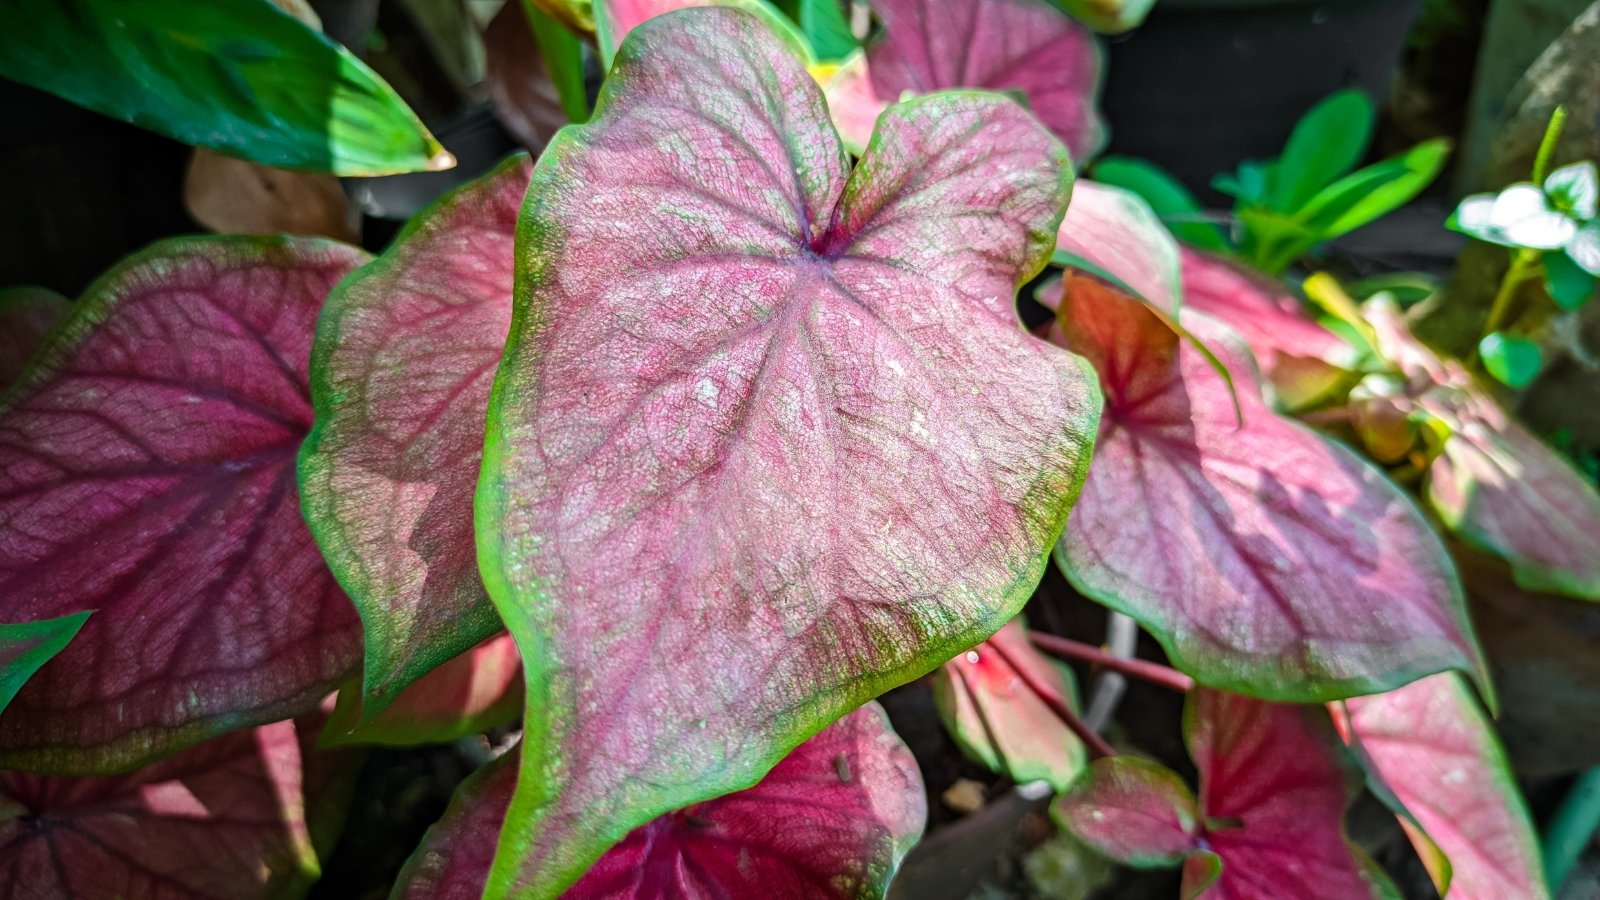 Heart to Heart 'Chinook' Caladium showcases colorful, heart-shaped leaves with intricate patterns in shades of pink, red, and green.
